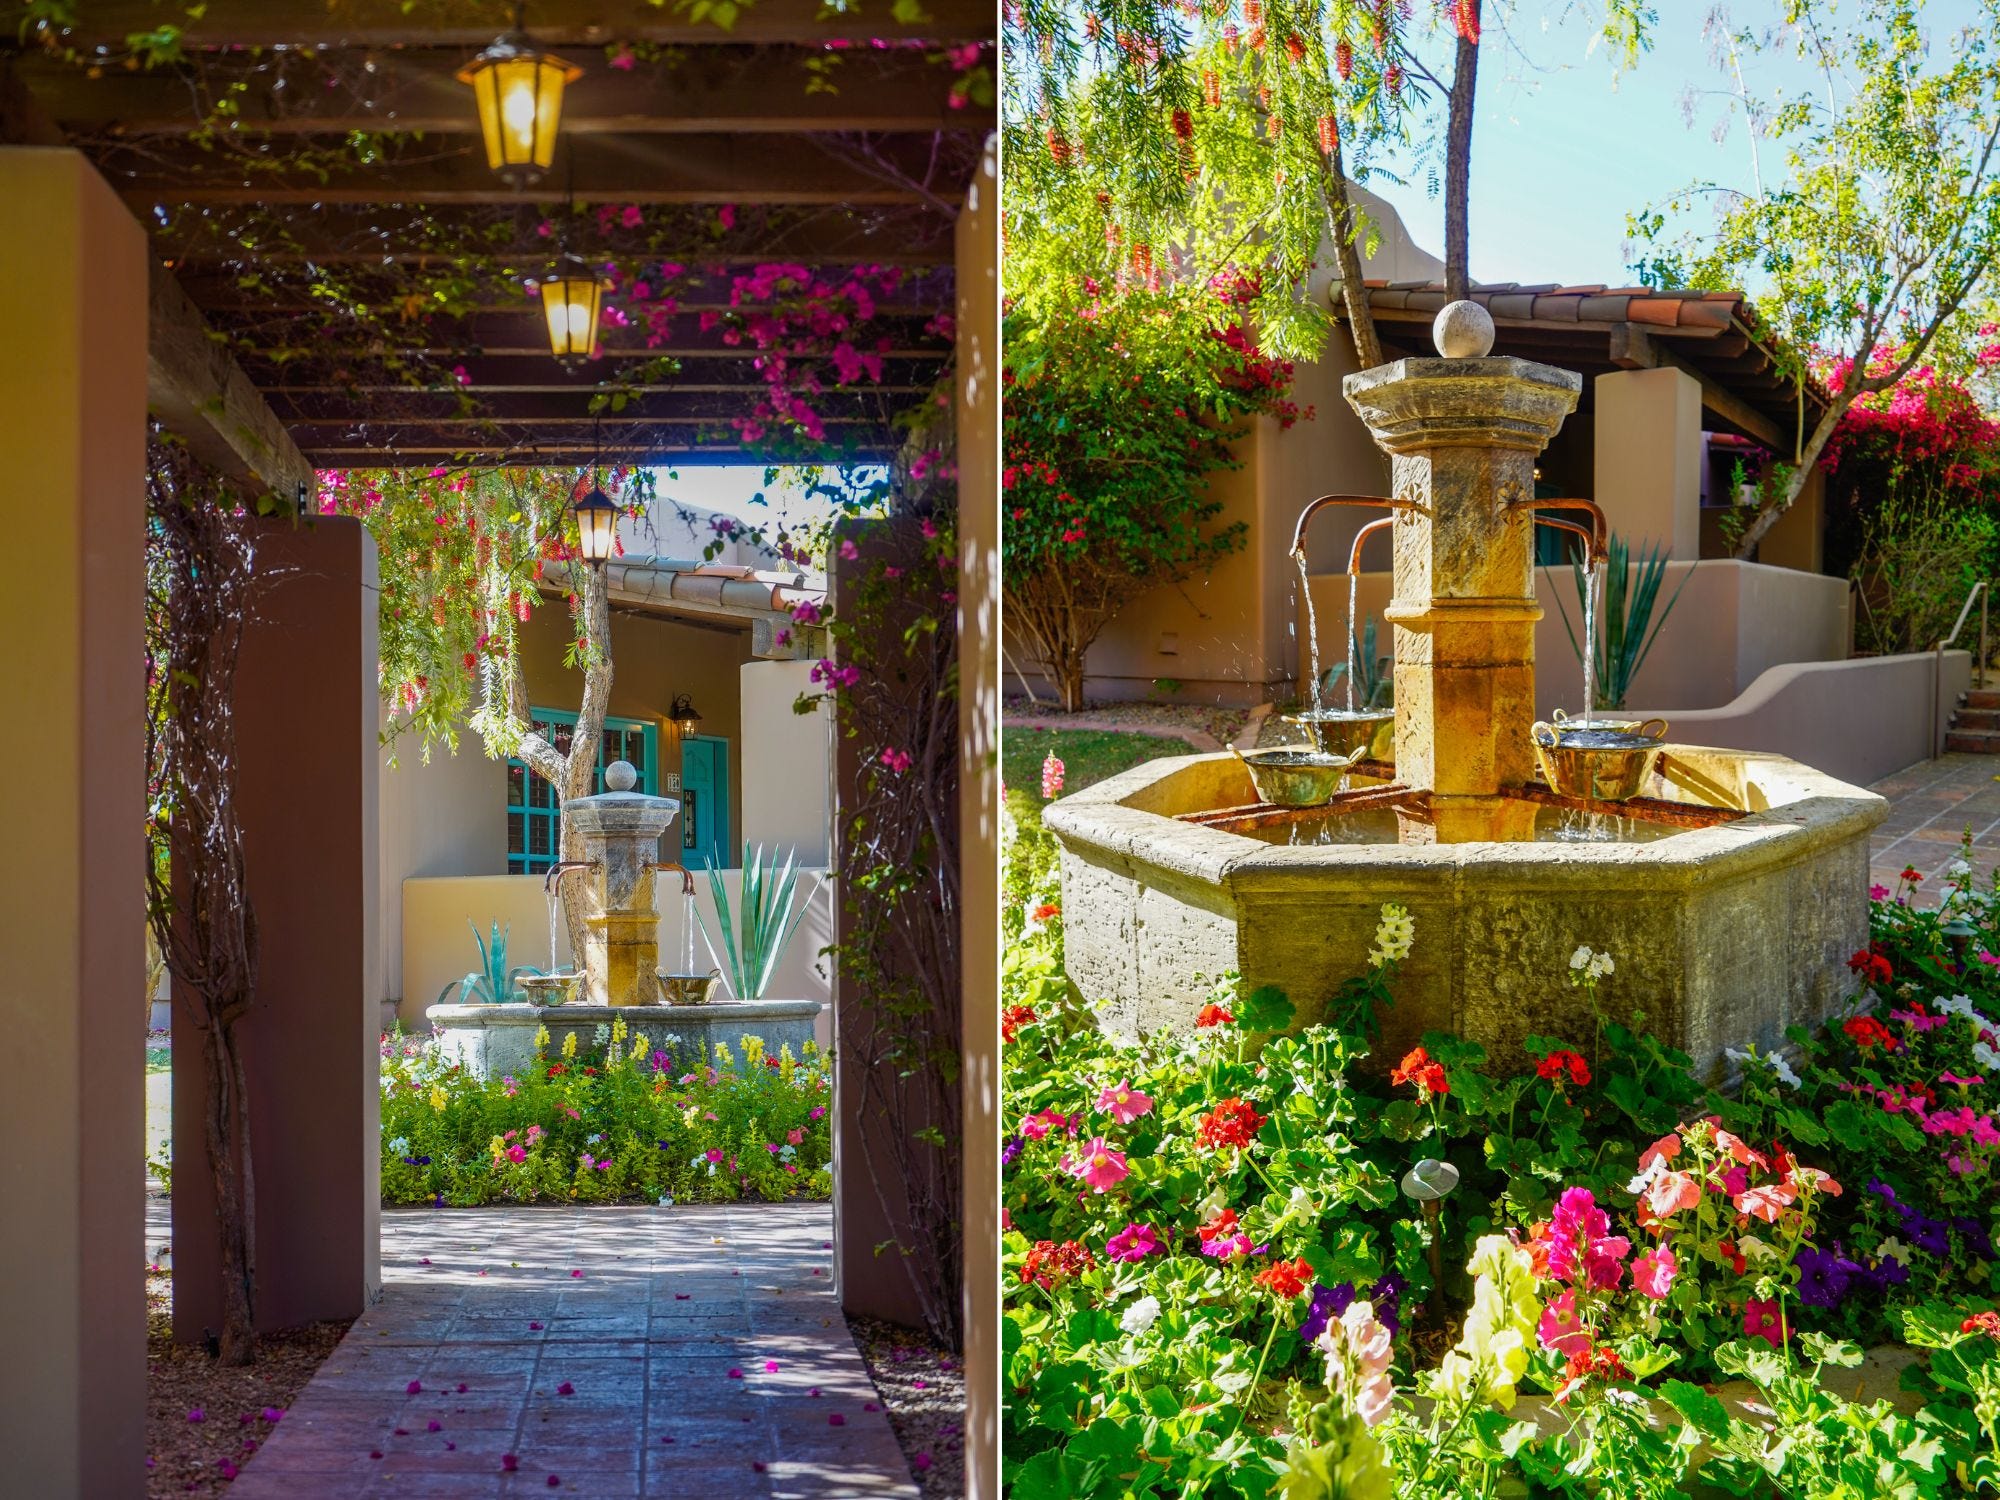 <p>Instead of being in a secluded space like at the Phoenician, the gardens lined the pathways around the resort.</p><p>Guests can access bikes on the property, but I explored on foot.</p><p>It was a peaceful and quiet walk to my room. I passed through archways and spotted fountains and vibrant flower beds.</p>